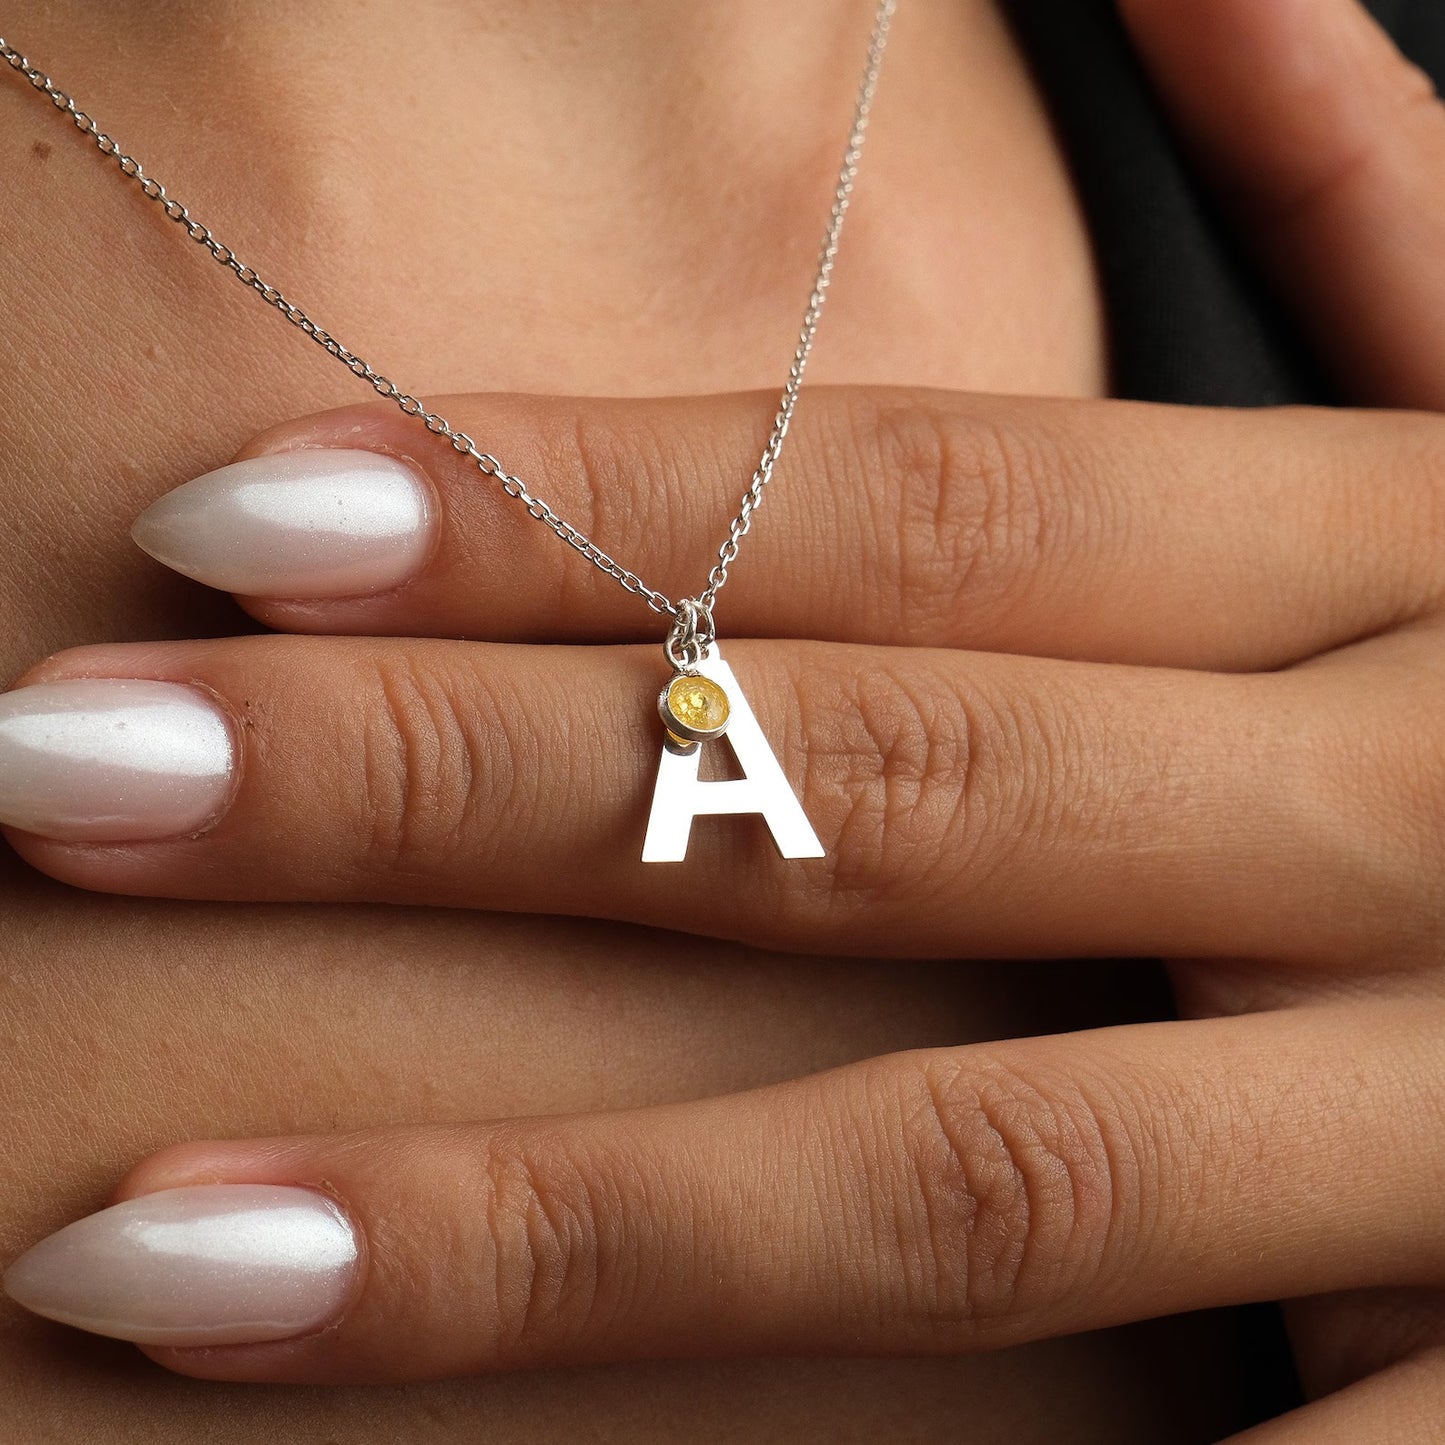 A symbol of love, this elegant 18 carat gold initial birthstone necklace features a delicate gemstone and a personalized letter pendant, making it a thoughtful present for your loved one.  Whether she's your girlfriend, fiancée, wife, sister, or mother, this necklace adds a touch of sophistication and exclusivity to any outfit and is the perfect gift to show that special woman in your life how much she means to you.